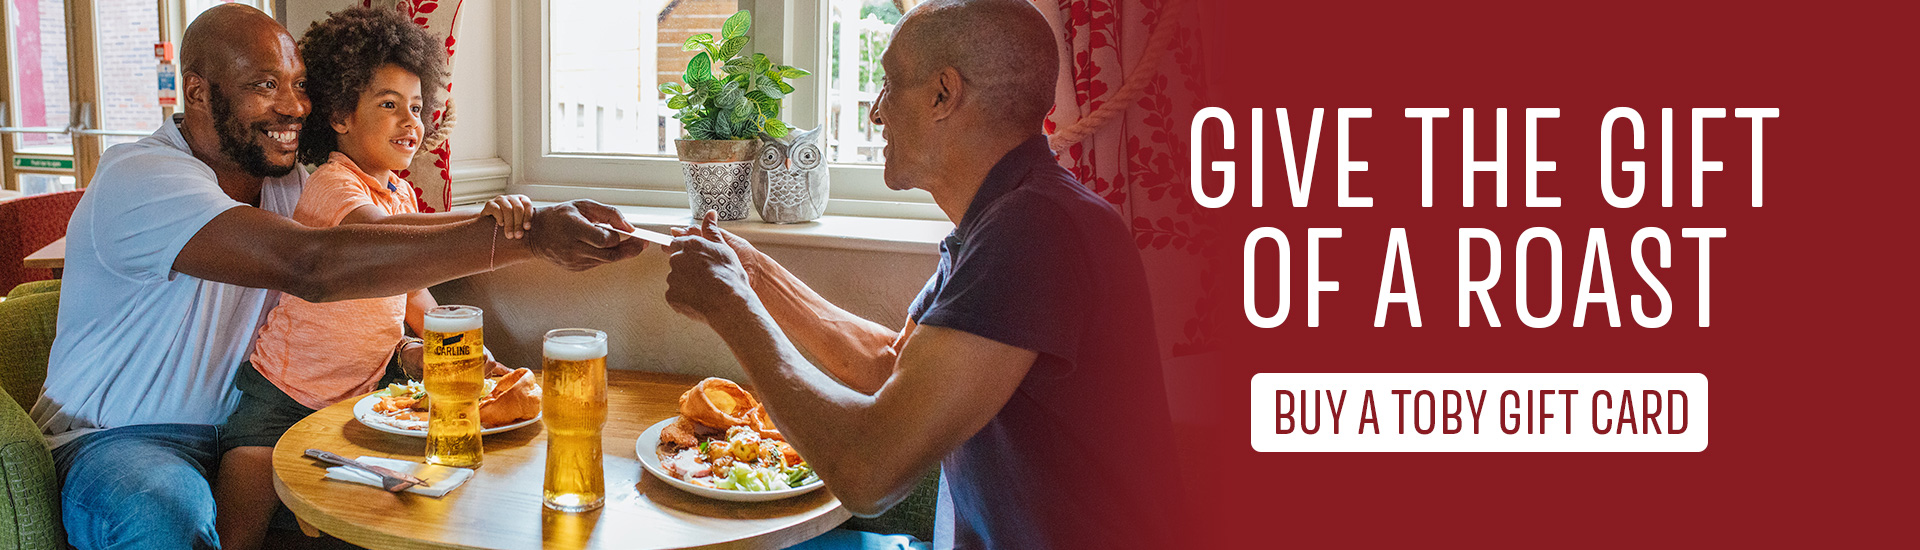 Toby Carvery Cardiff Gate Gift Card